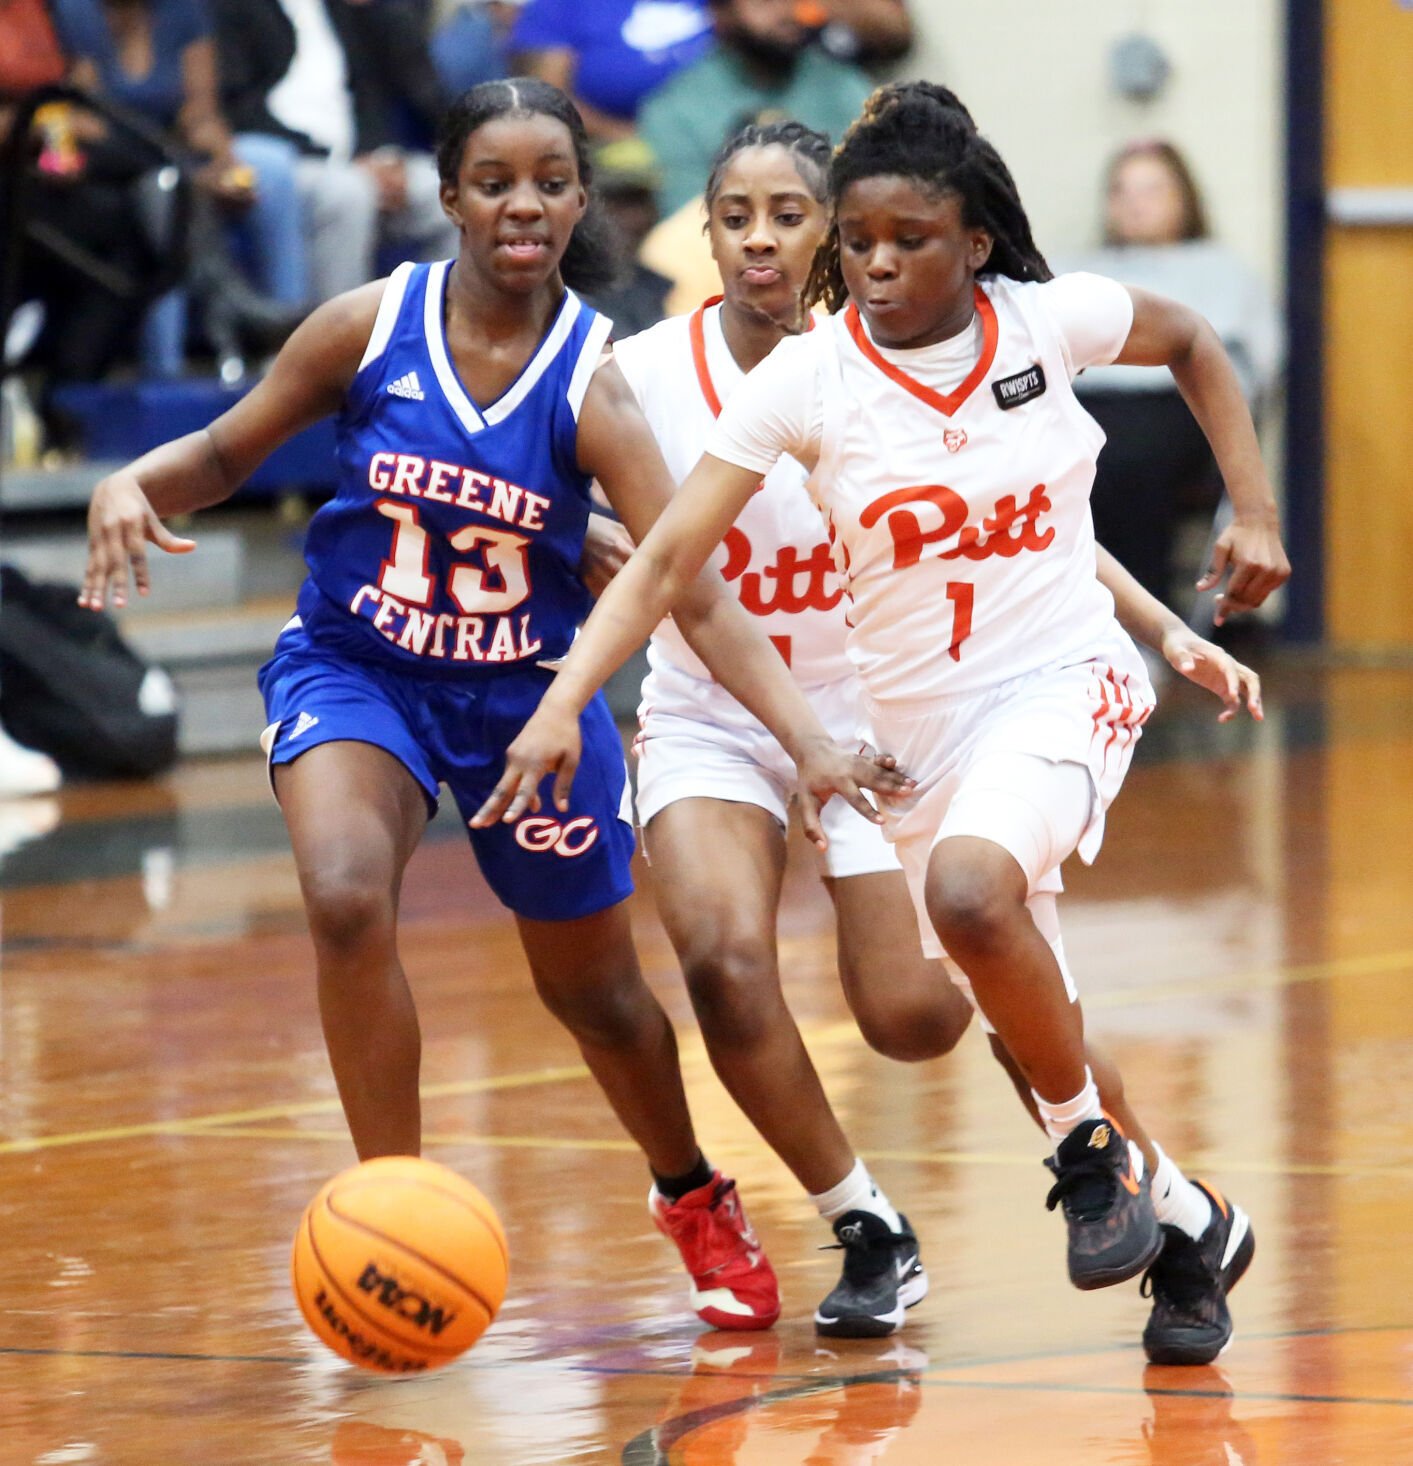 North Pitt and South Central Girls’ High School Basketball Teams Dominate in Conference Title Wins